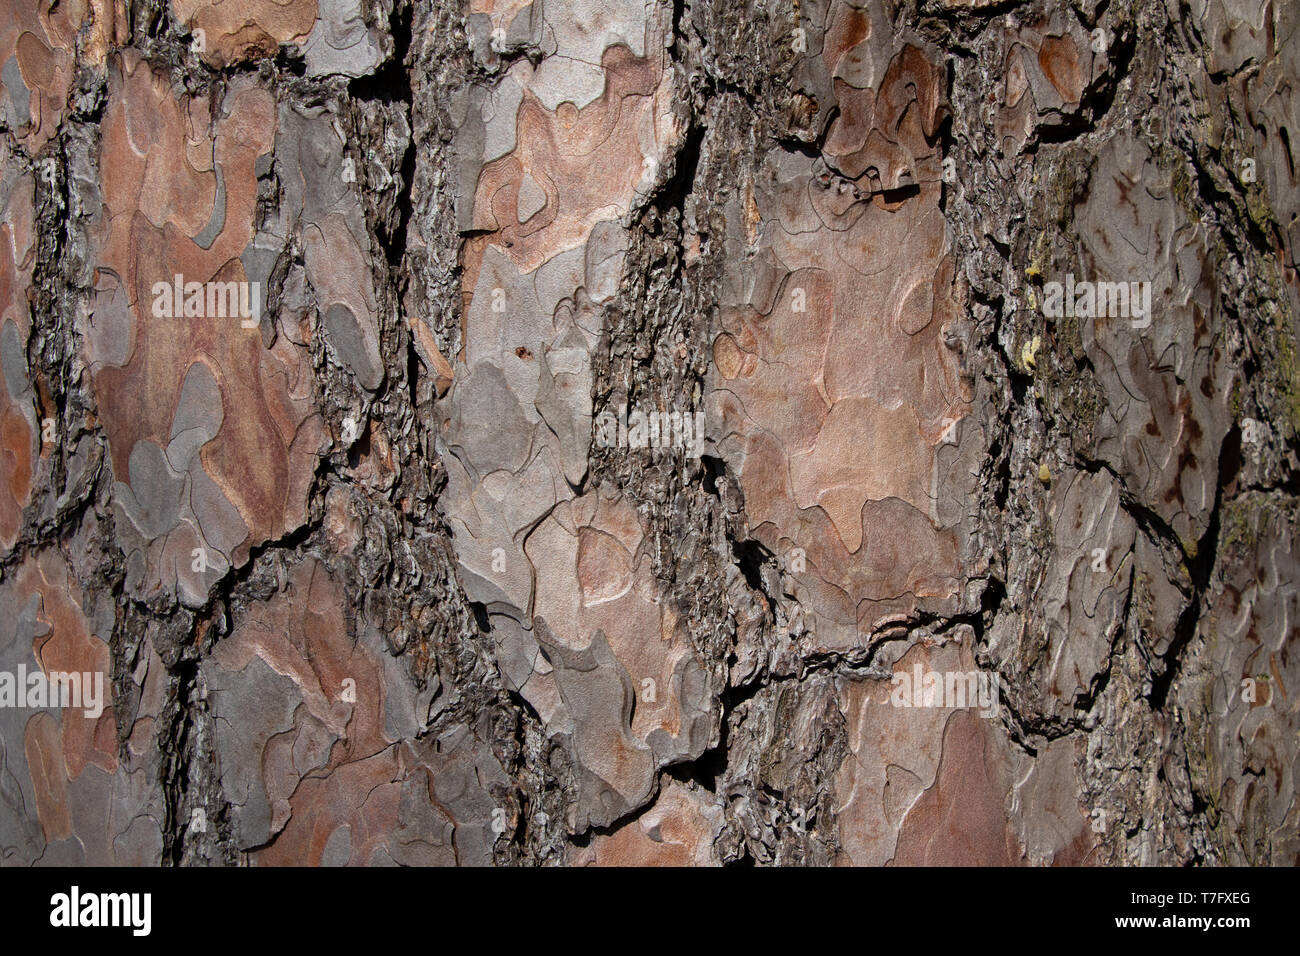 Tree bark texture of Pinus silvestris or Scots pine with beautiful rough cracked pattern Stock Photo